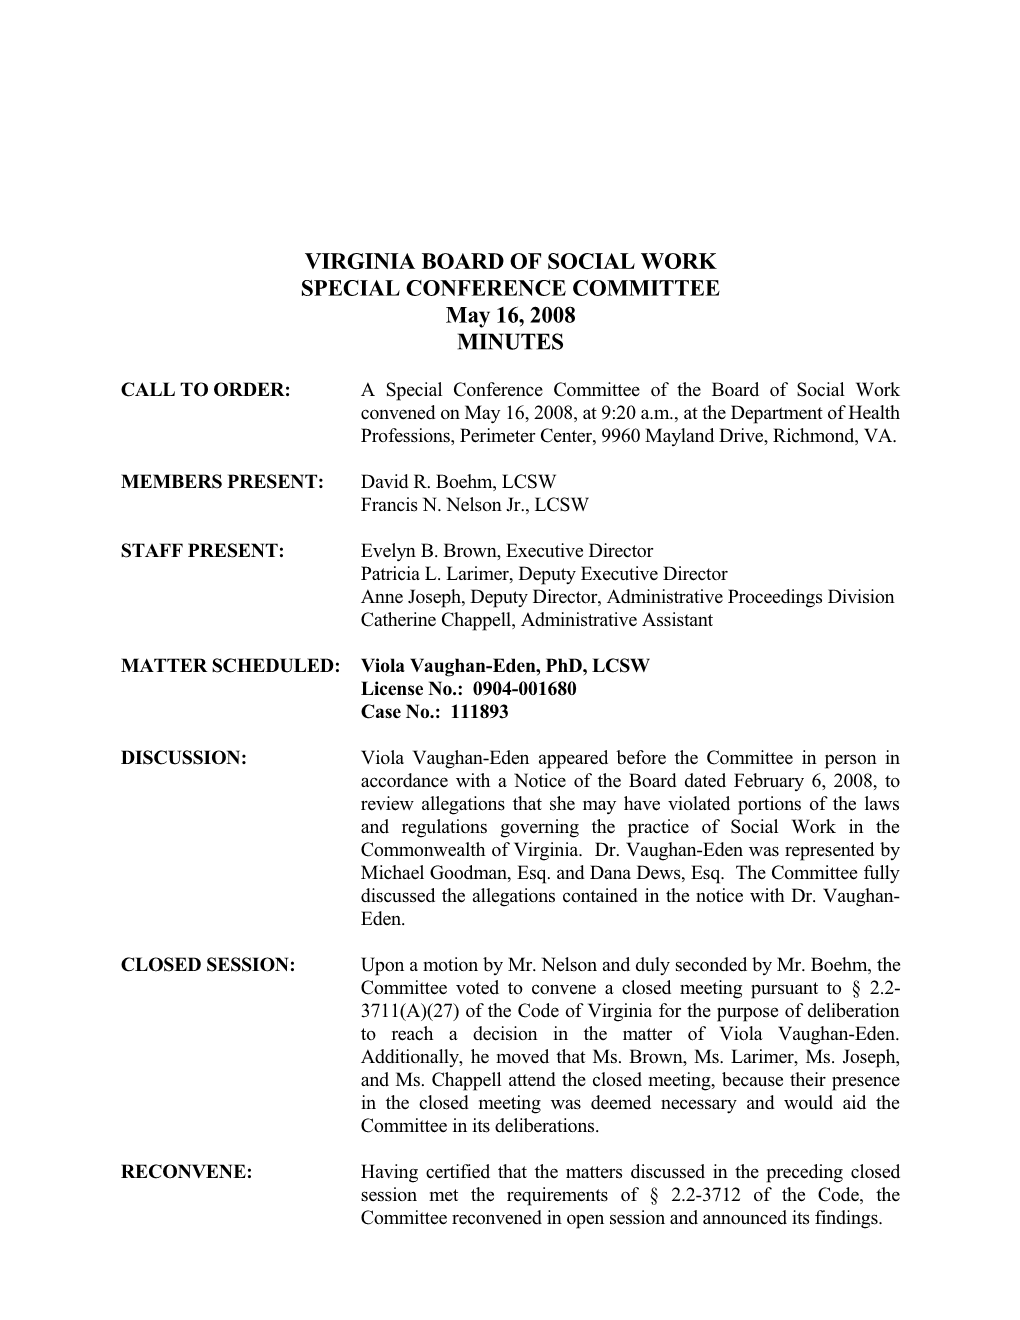 Board of Social Work - 5/16/2008 SCC Minutes